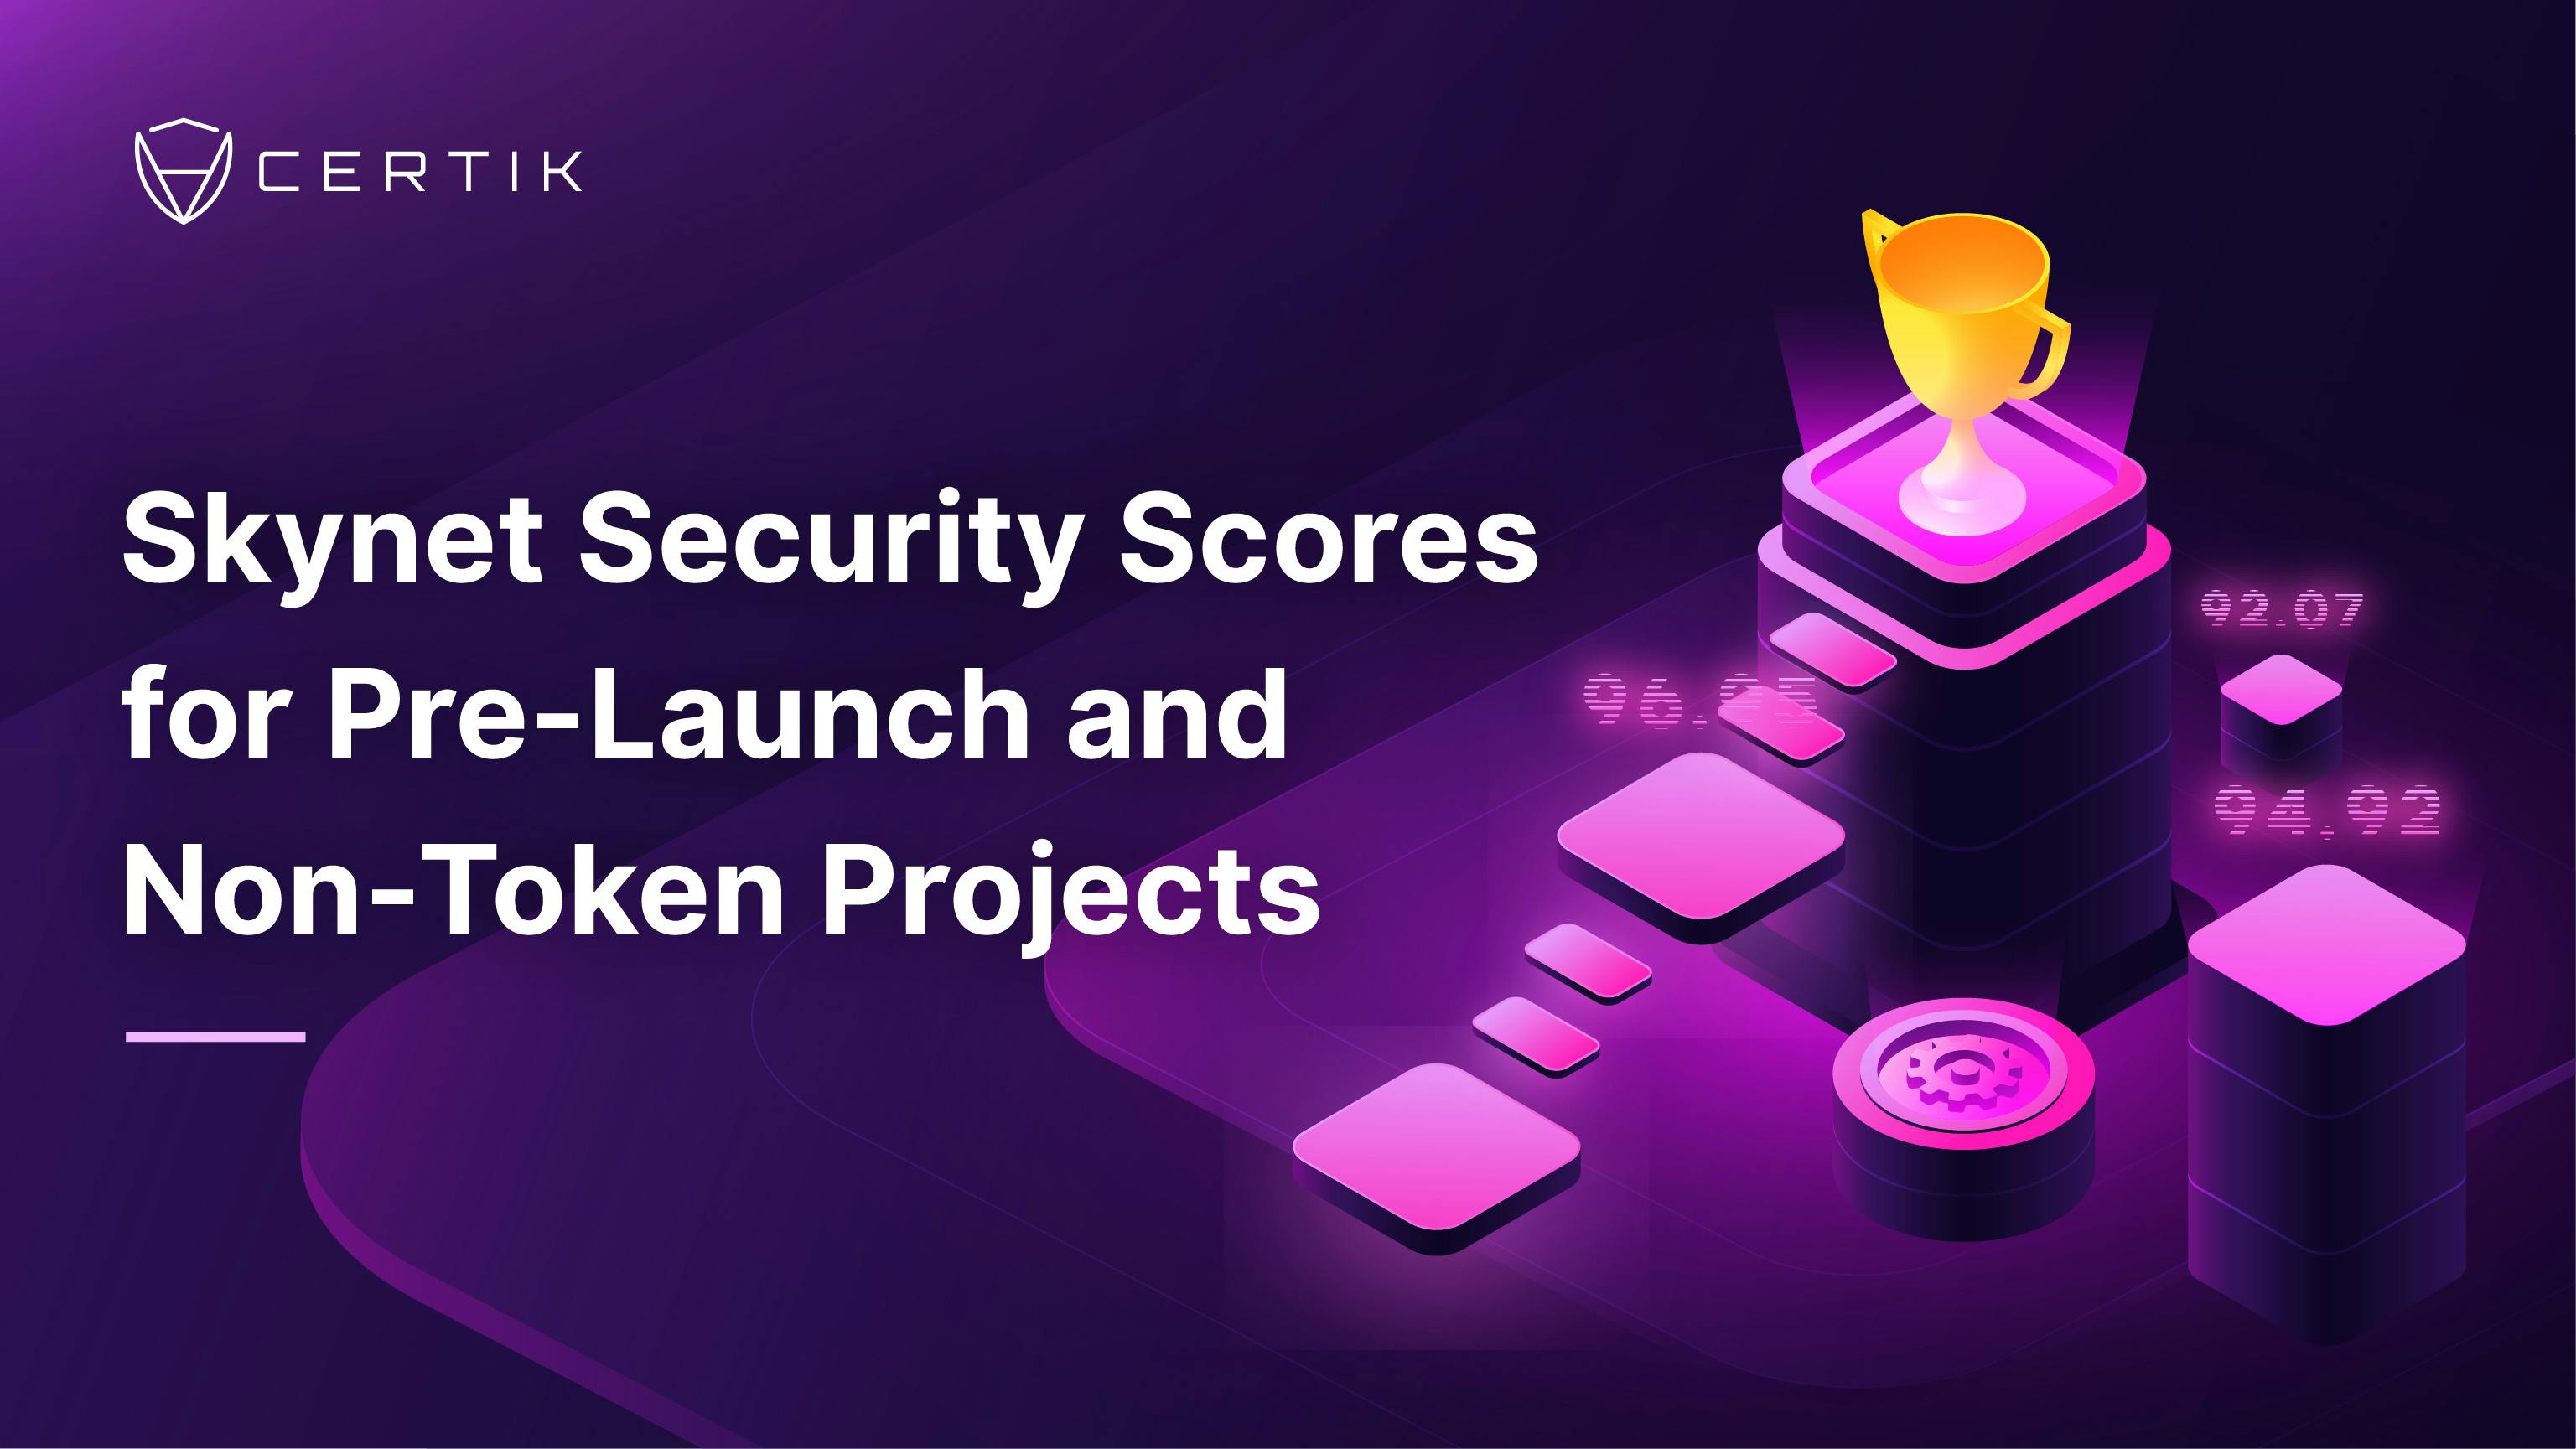 Introducing Skynet Security Scores for Pre-Launch and Non-Token Projects